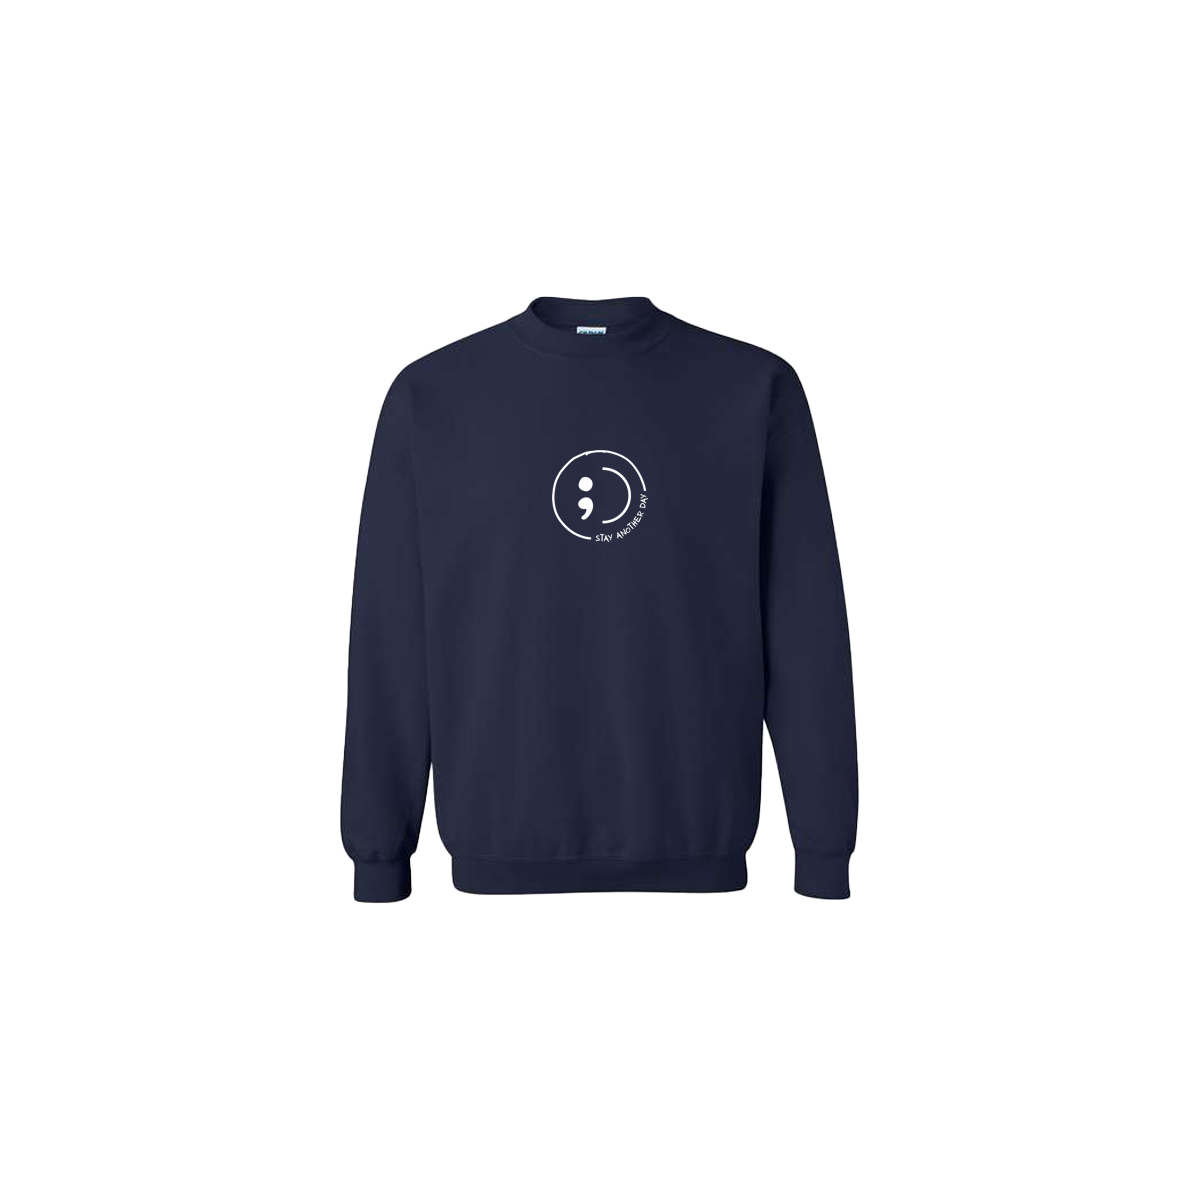 Stay Another Day Smiley with text Embroidered Navy Blue Crewneck - Mental Health Awareness Clothing